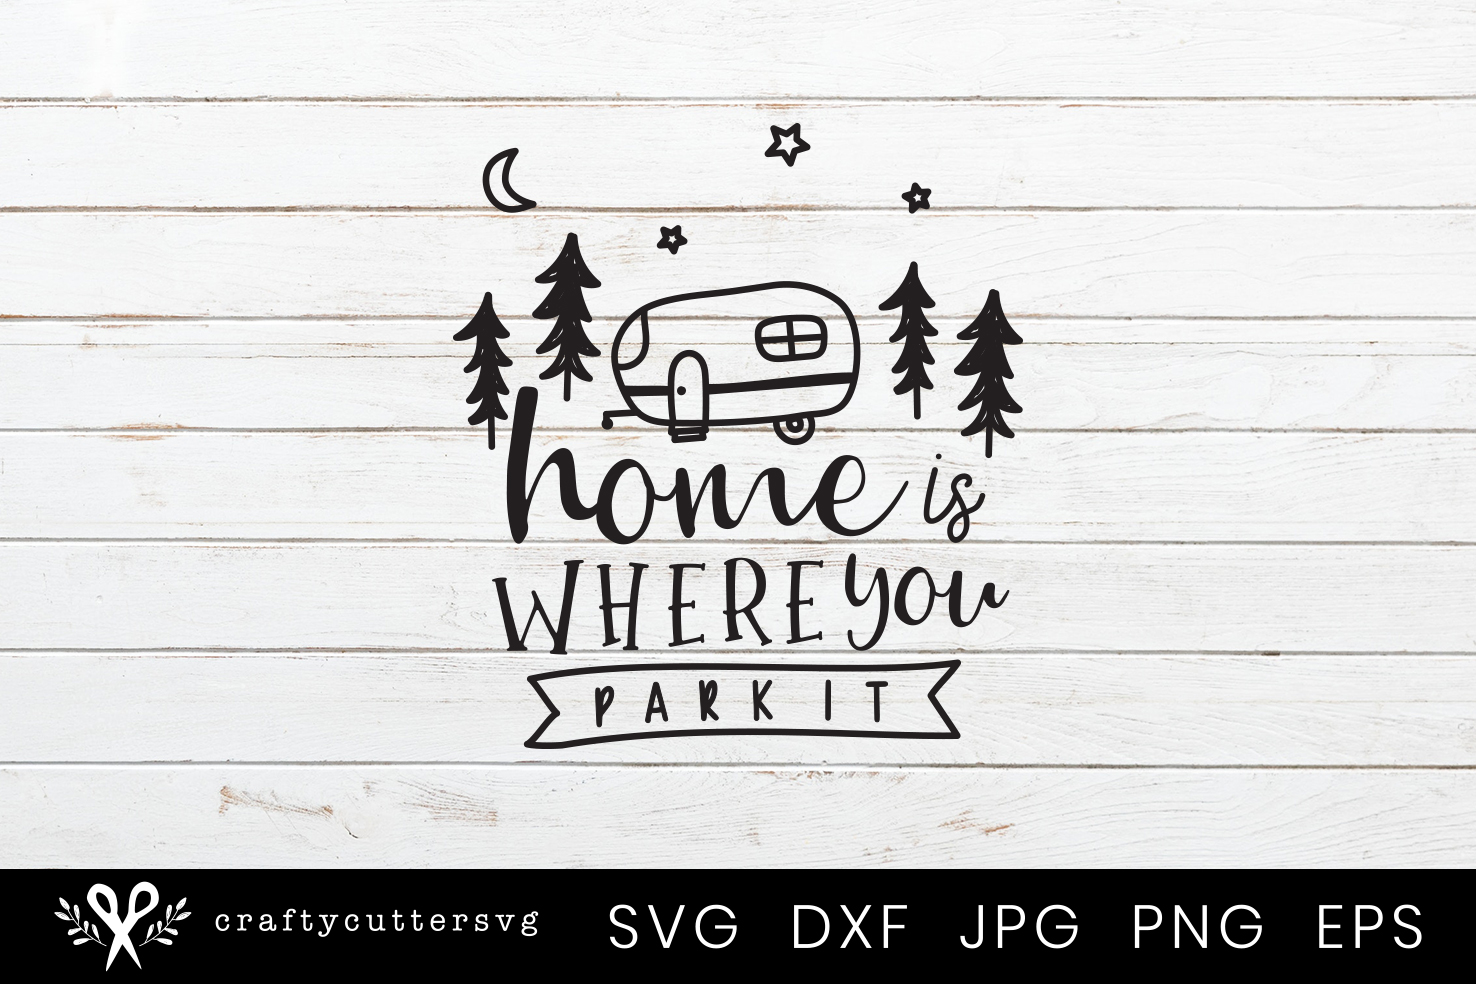 Download Home is where you park it Svg Cut File Camping Clipart